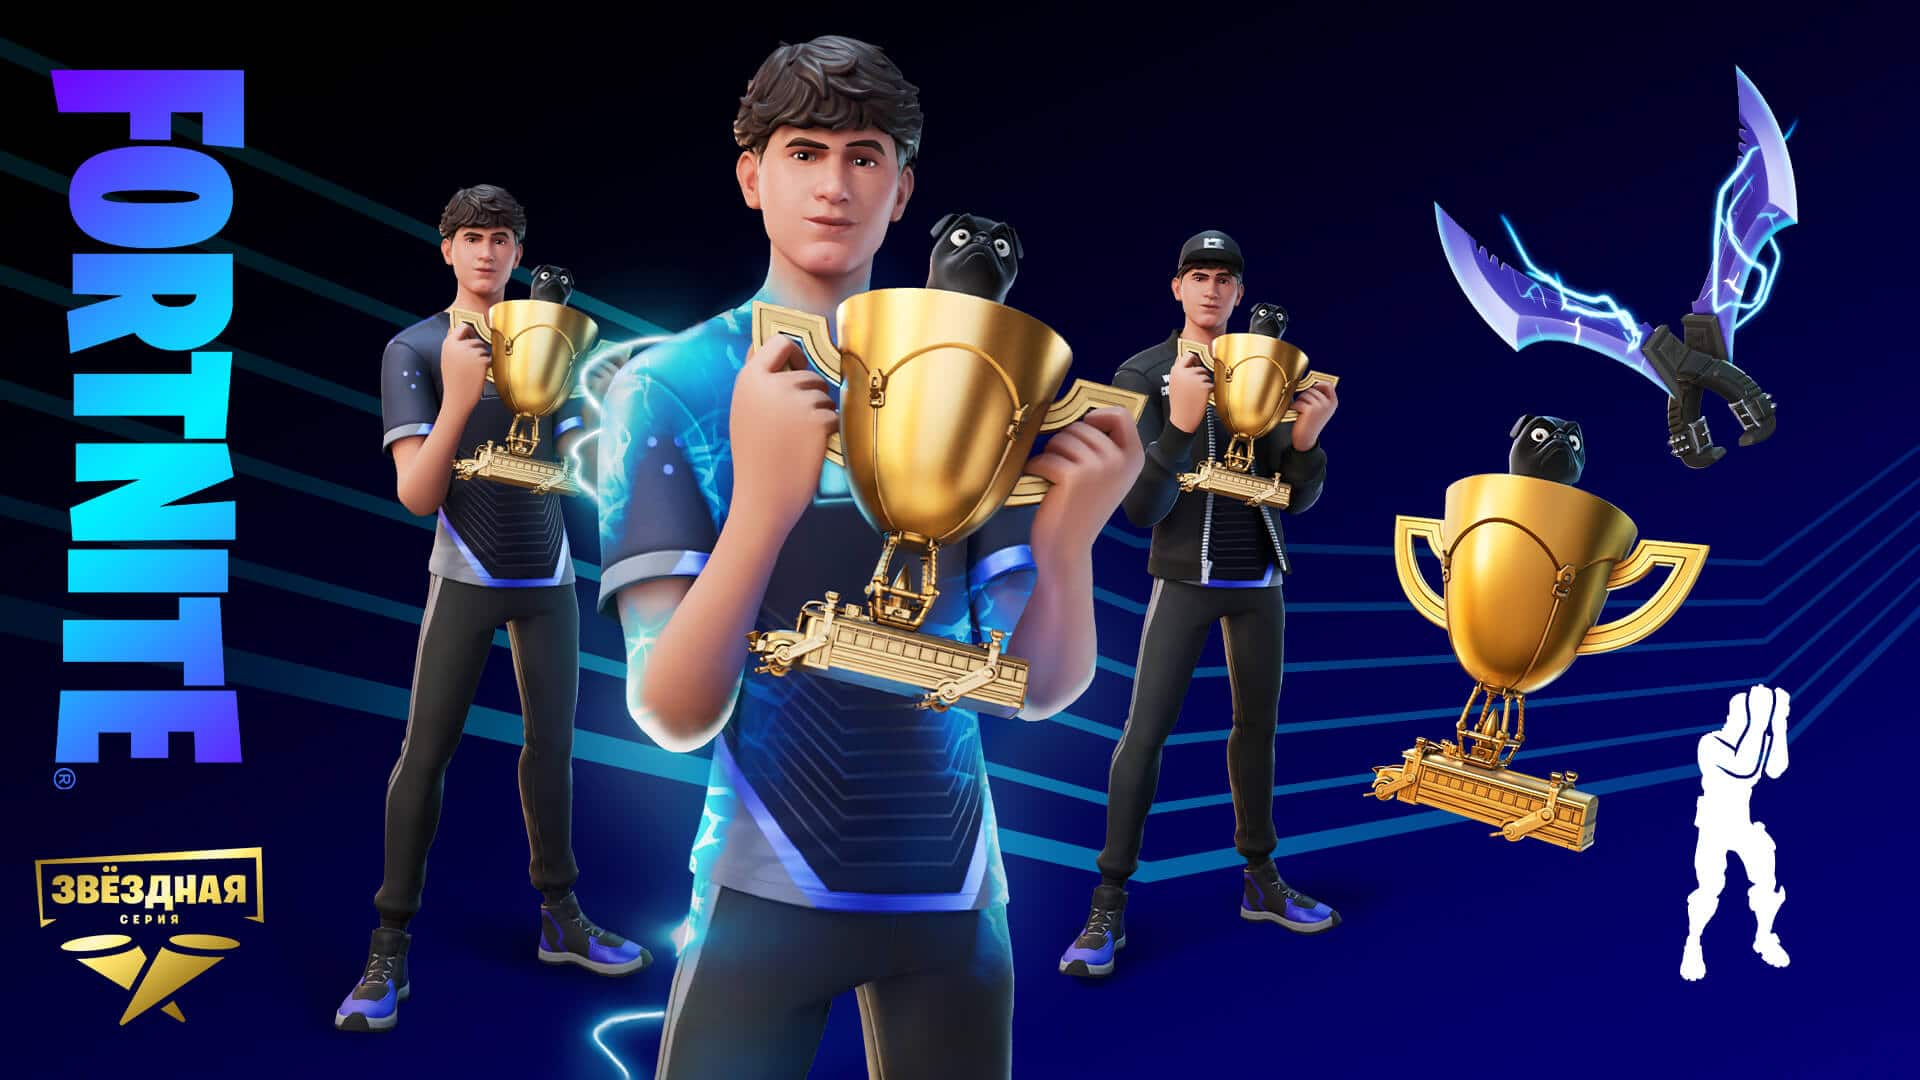 Bugha got his own Fortnite tournament and outfit